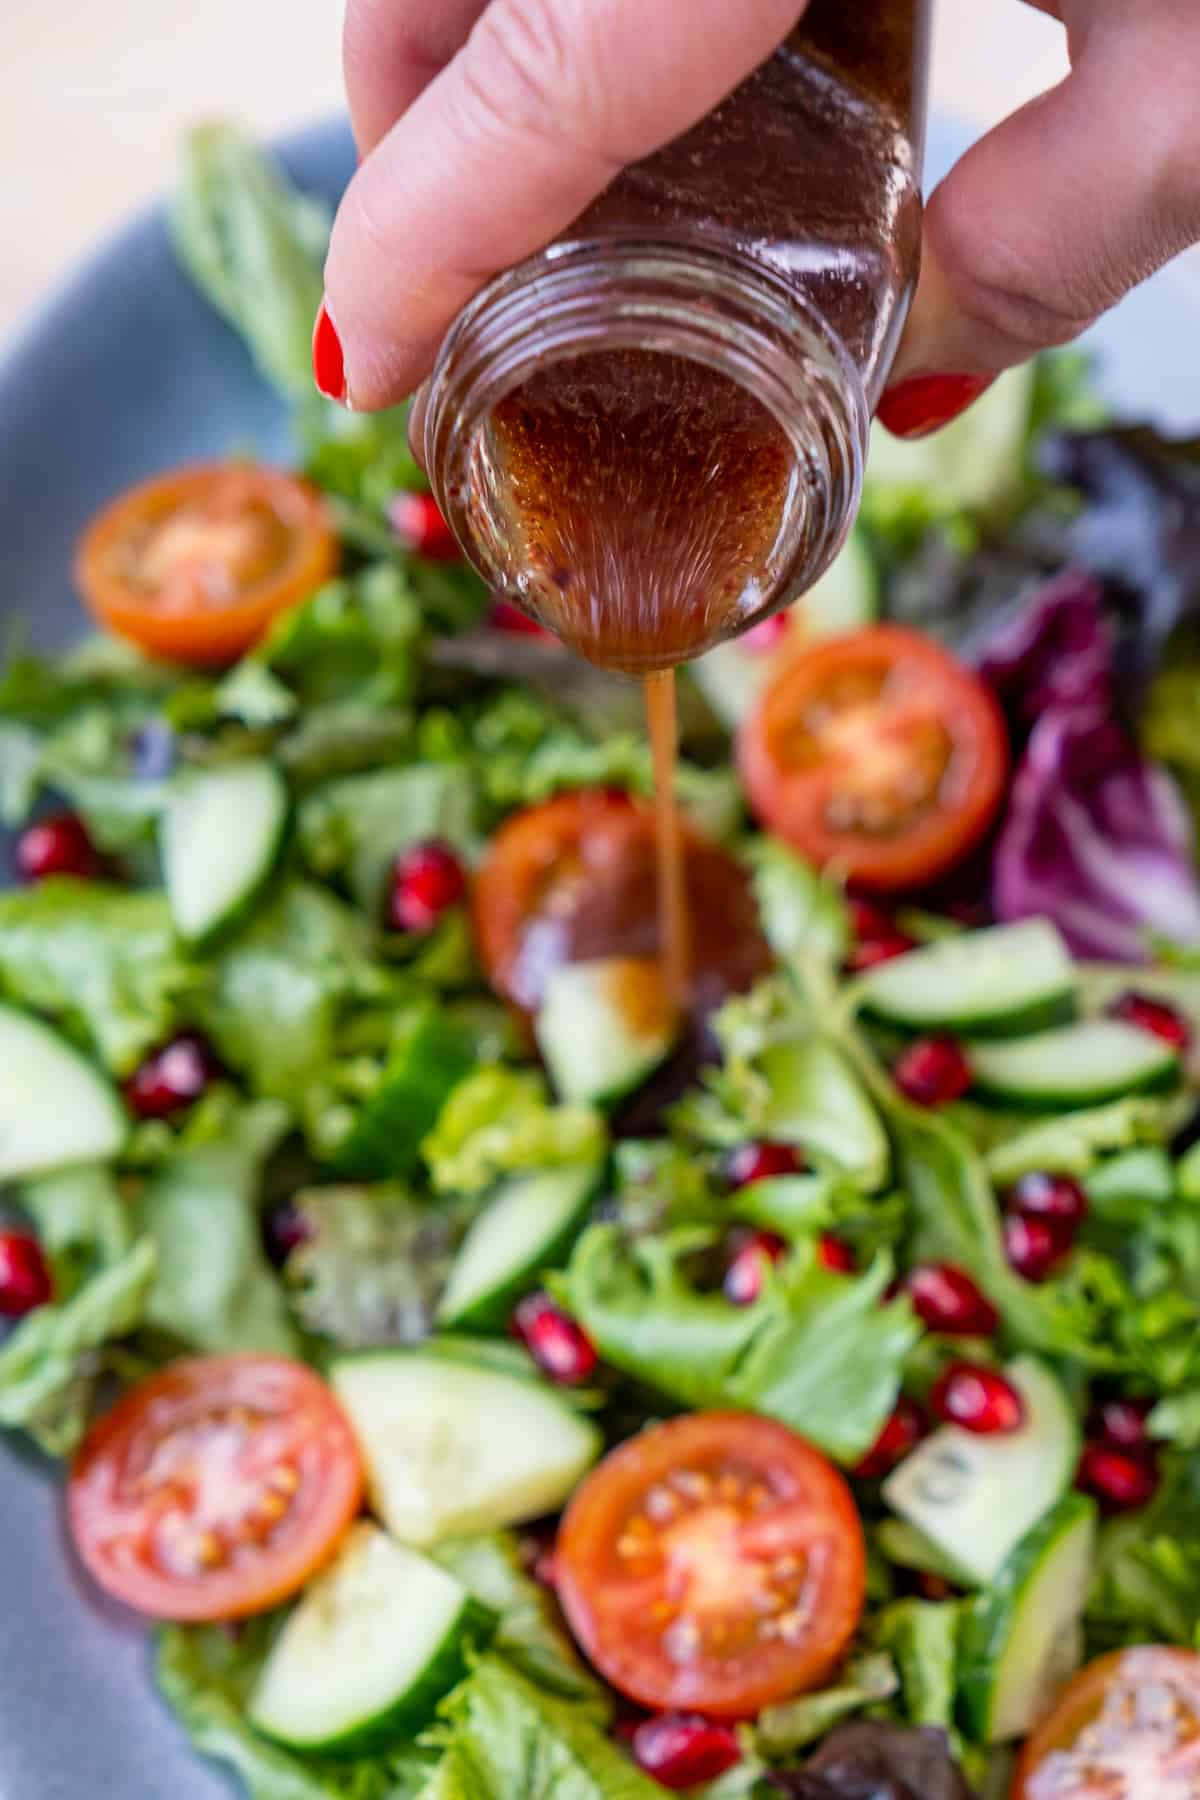 A hand pouring salad dressing from a jar on a green salad.